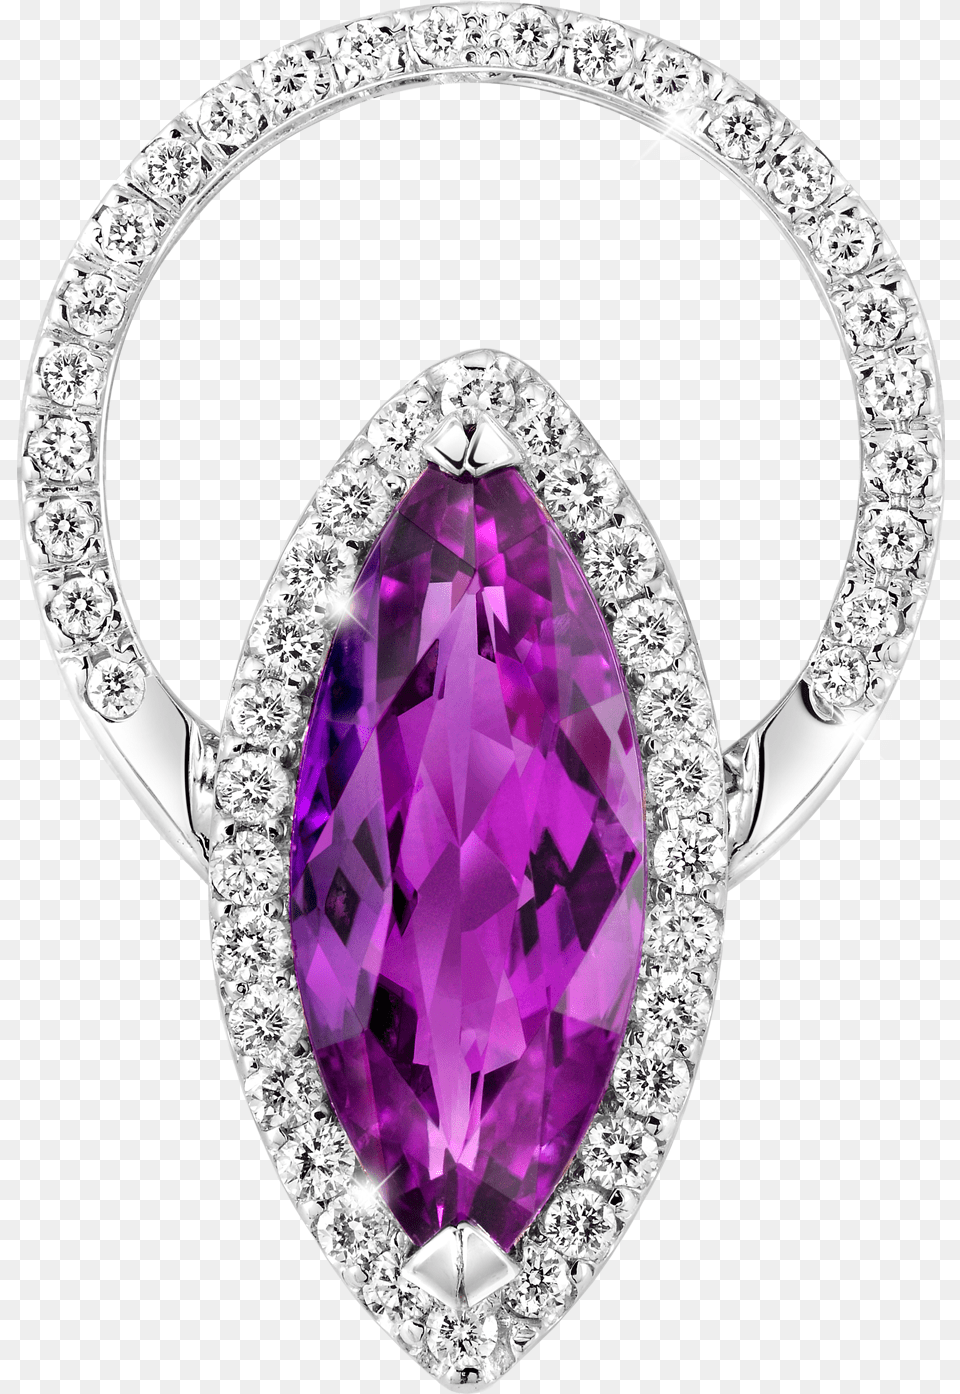 Convertible From Ring To Pendant, Accessories, Gemstone, Jewelry, Ornament Png